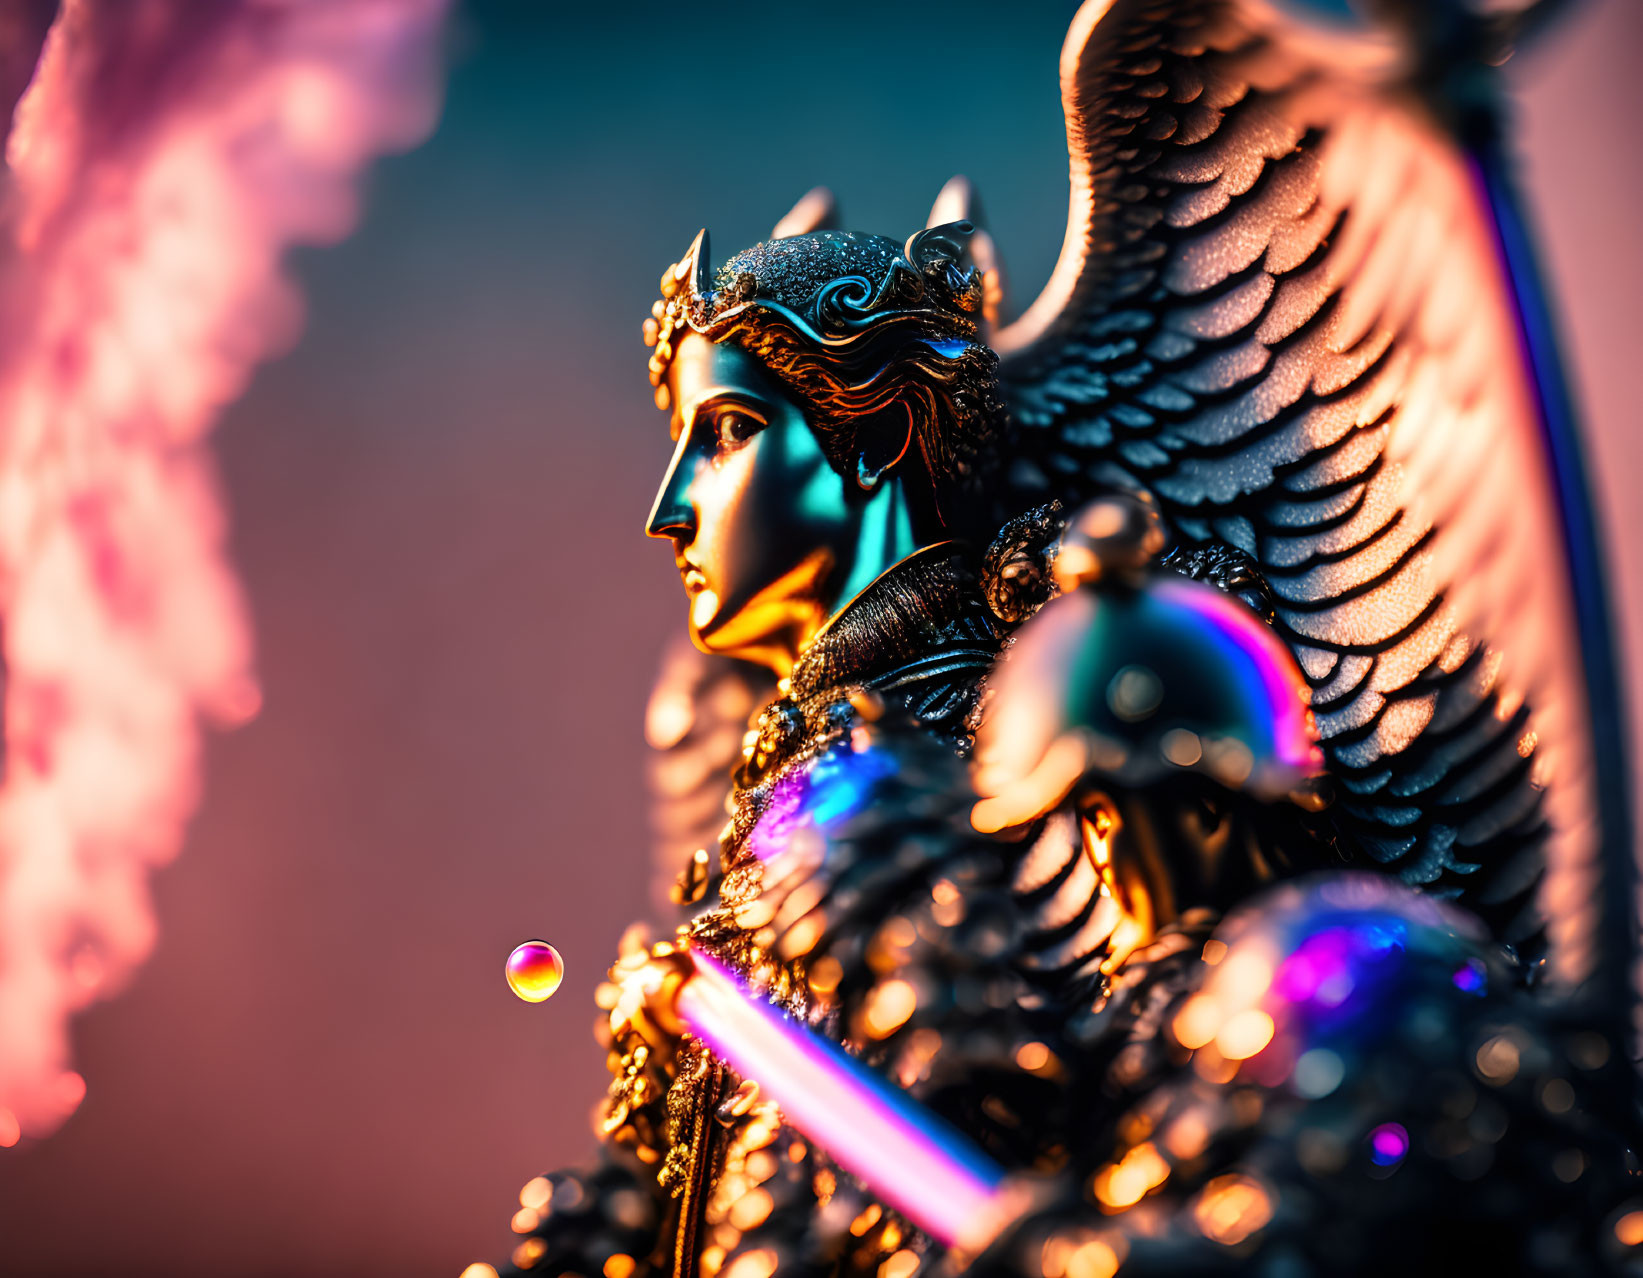 Colorful fantasy figurine with wings and armor on soft background